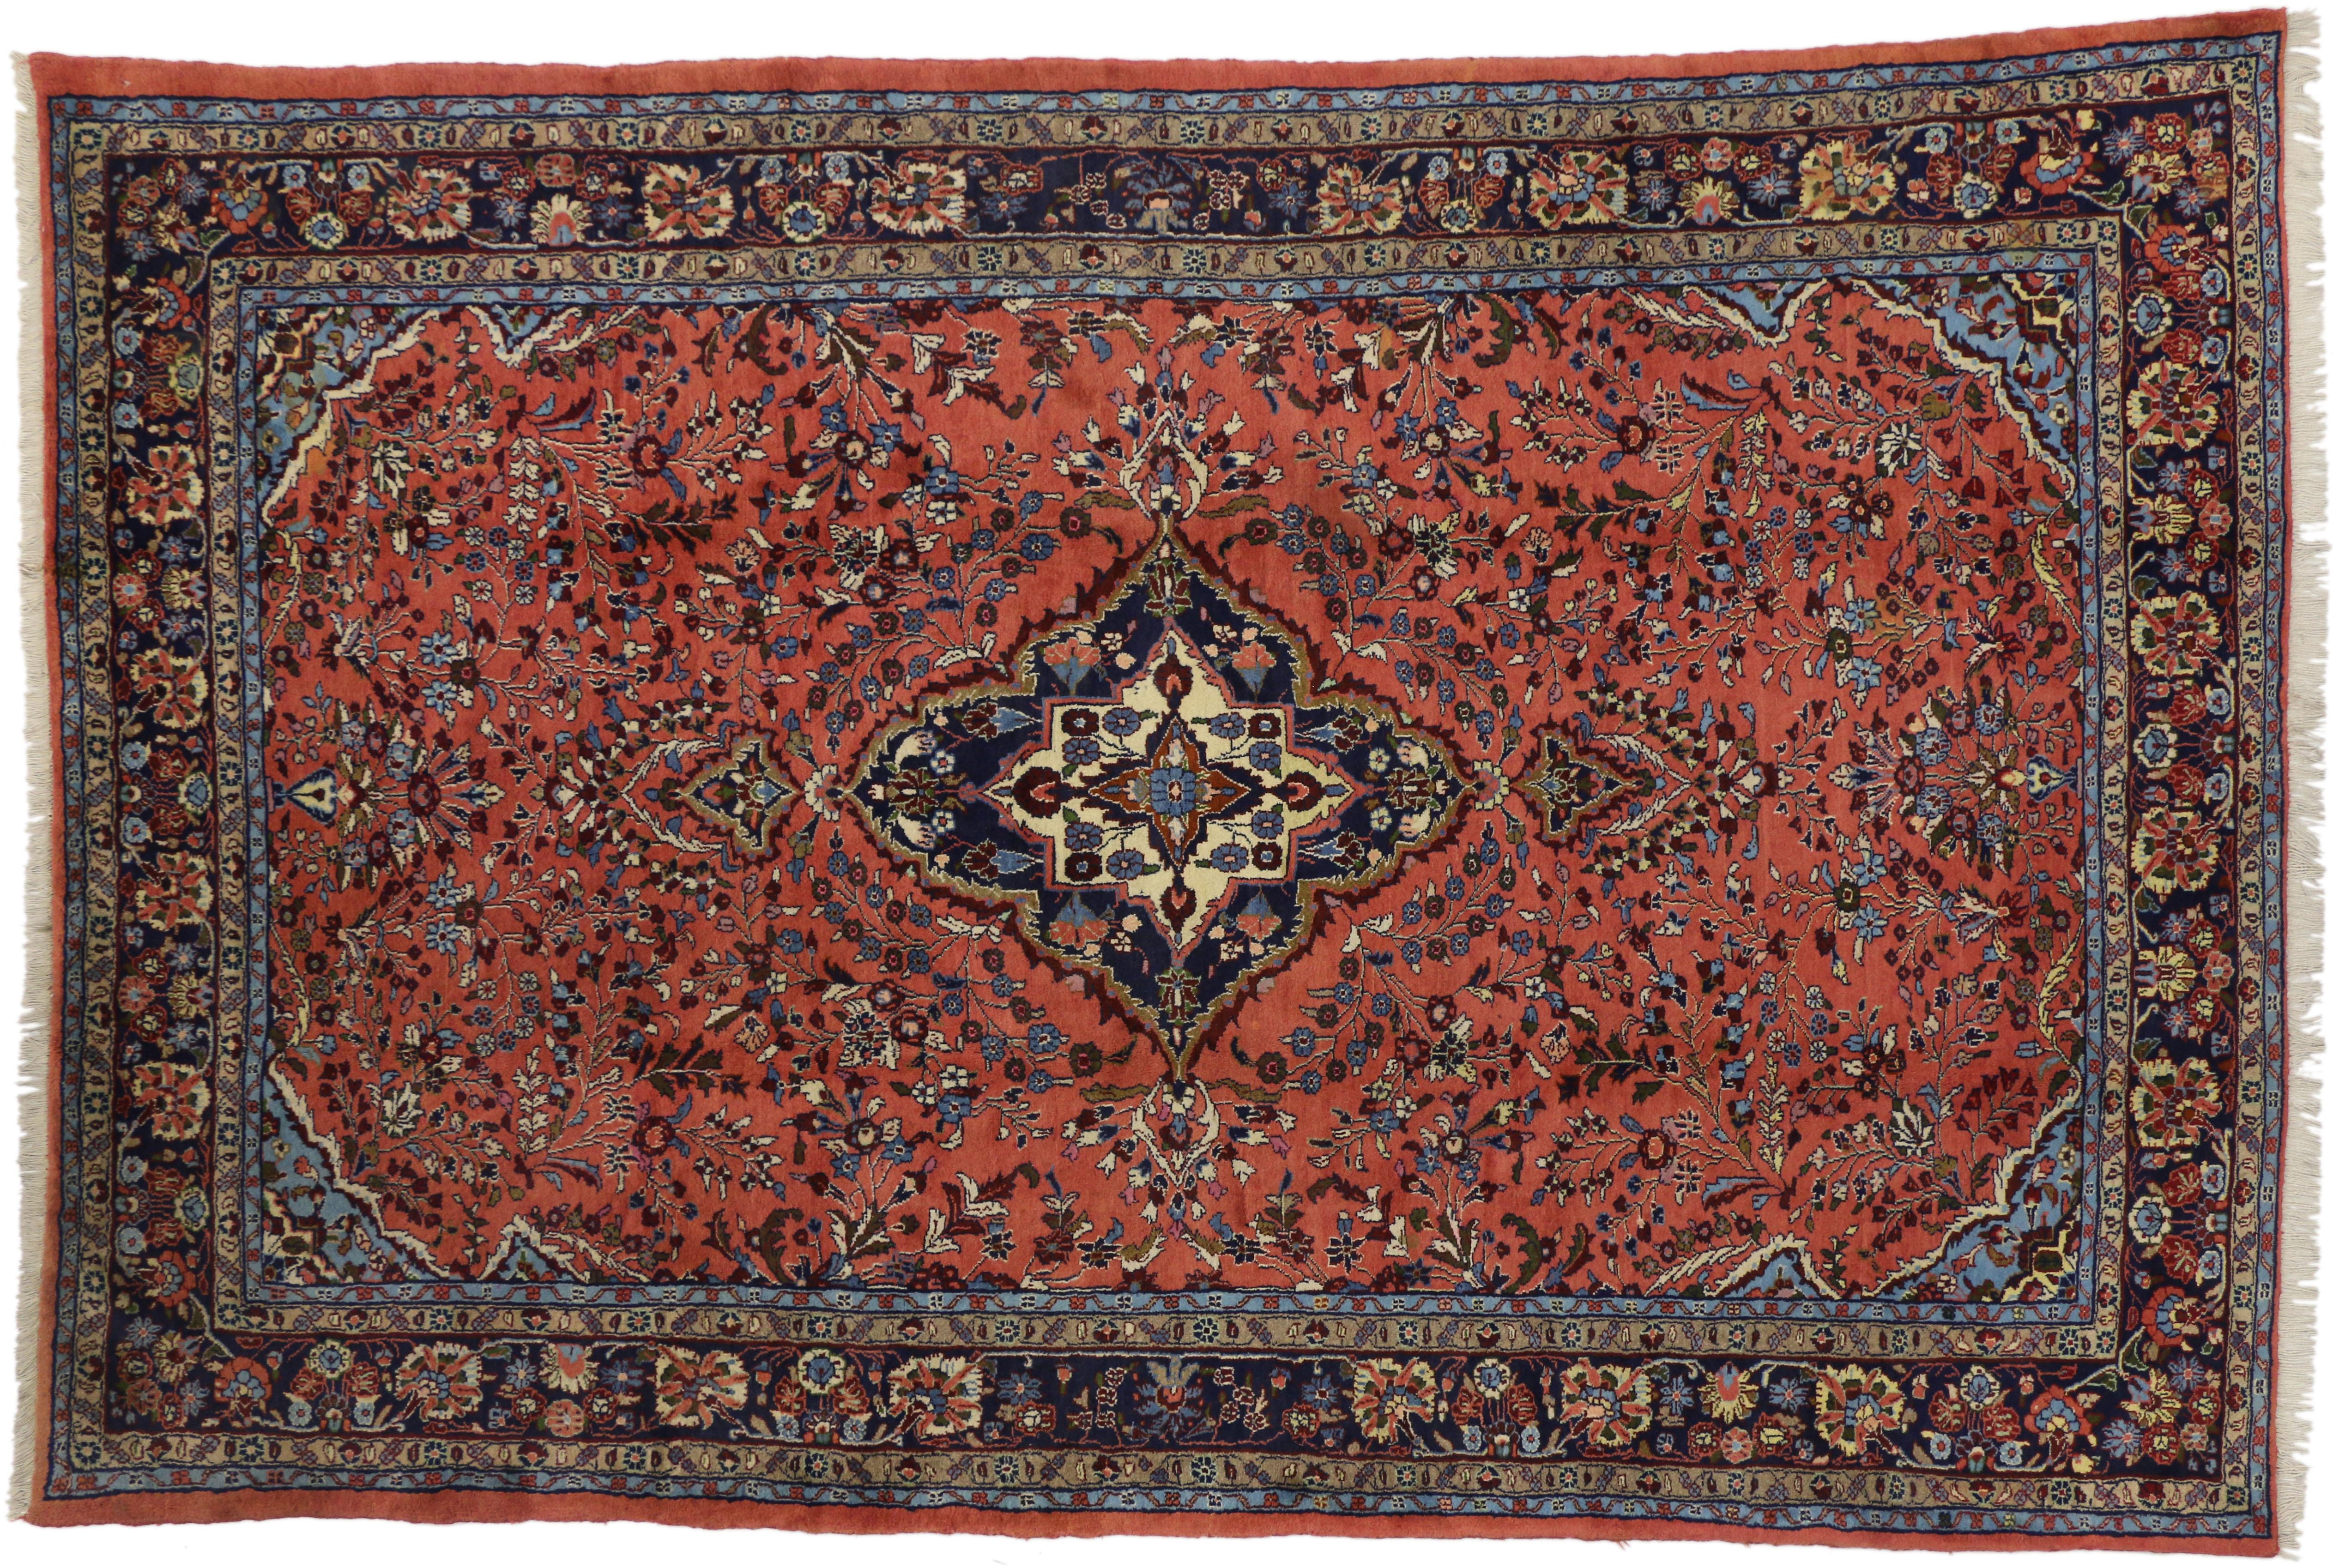 60340, vintage Persian Mehraban rug with traditional style. This lovely hand-knotted wool vintage Persian Mehraban rug features a navy blue and ivory lobed medallion surrounded by allover floral sprays and blooming palmettes. Sky-blue corner